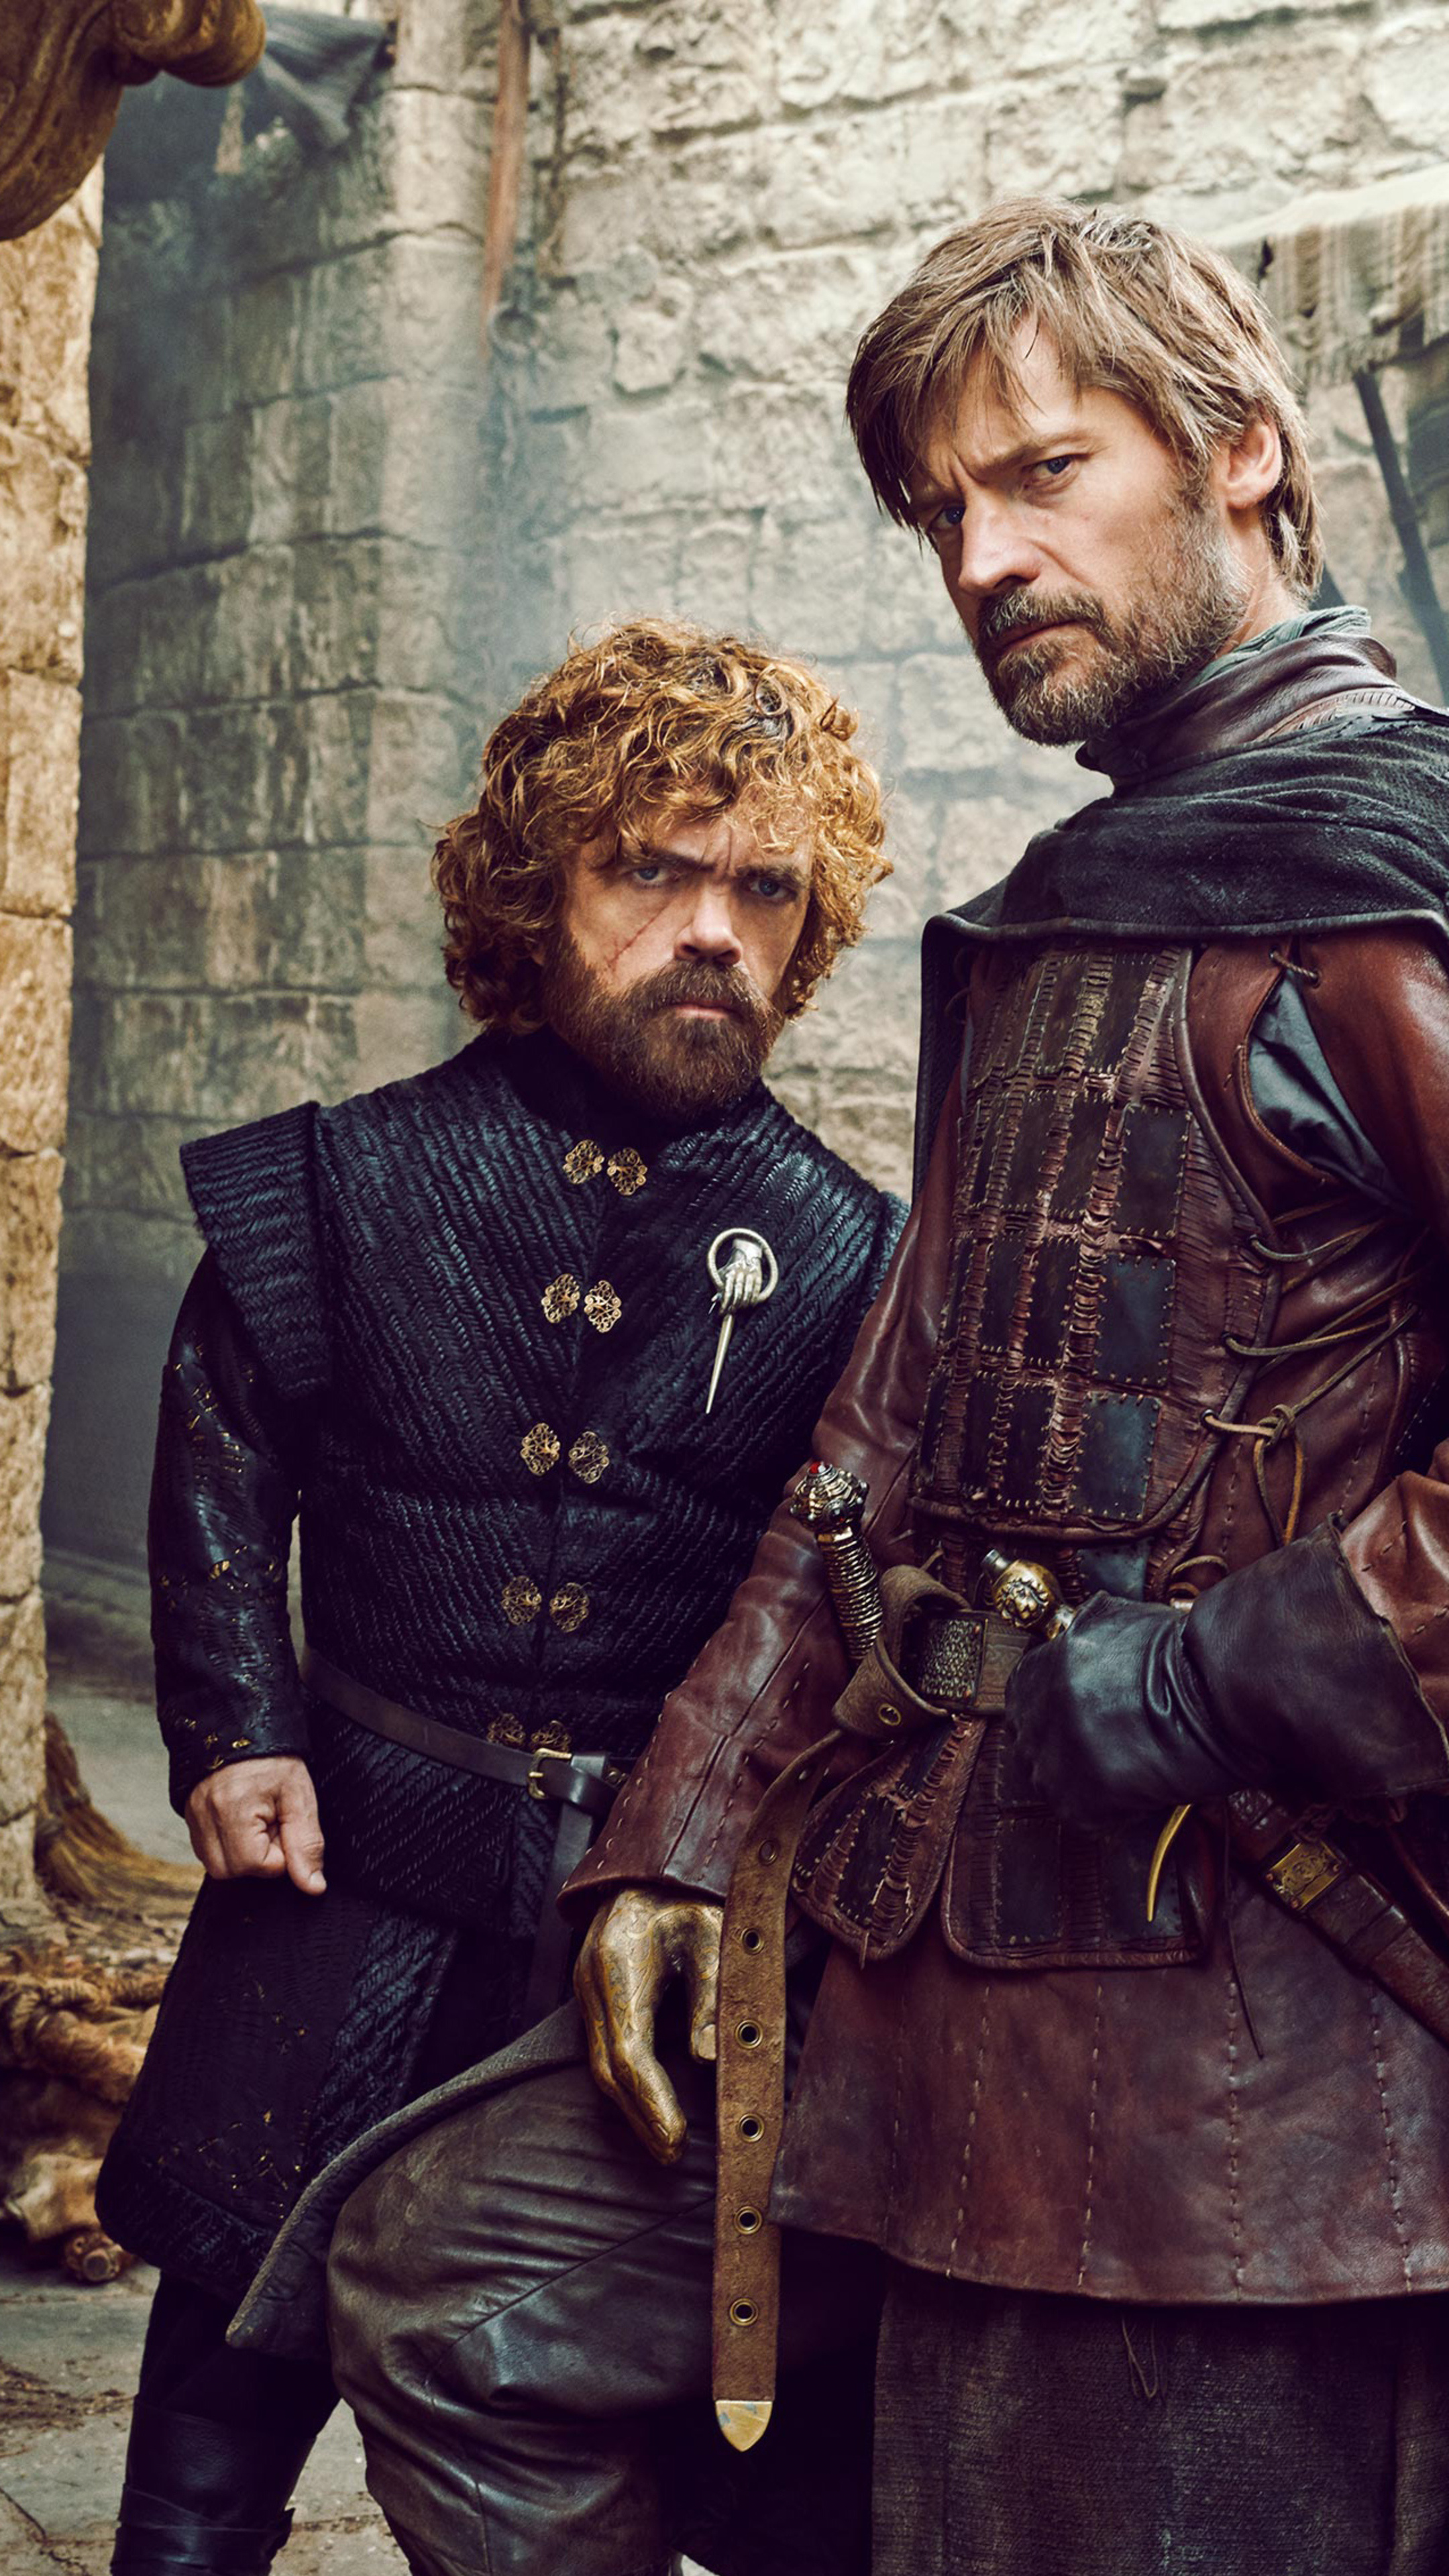 Game of Thrones, Jaime and Tyrion, Xperia wallpapers, 2160x3840 4K Phone